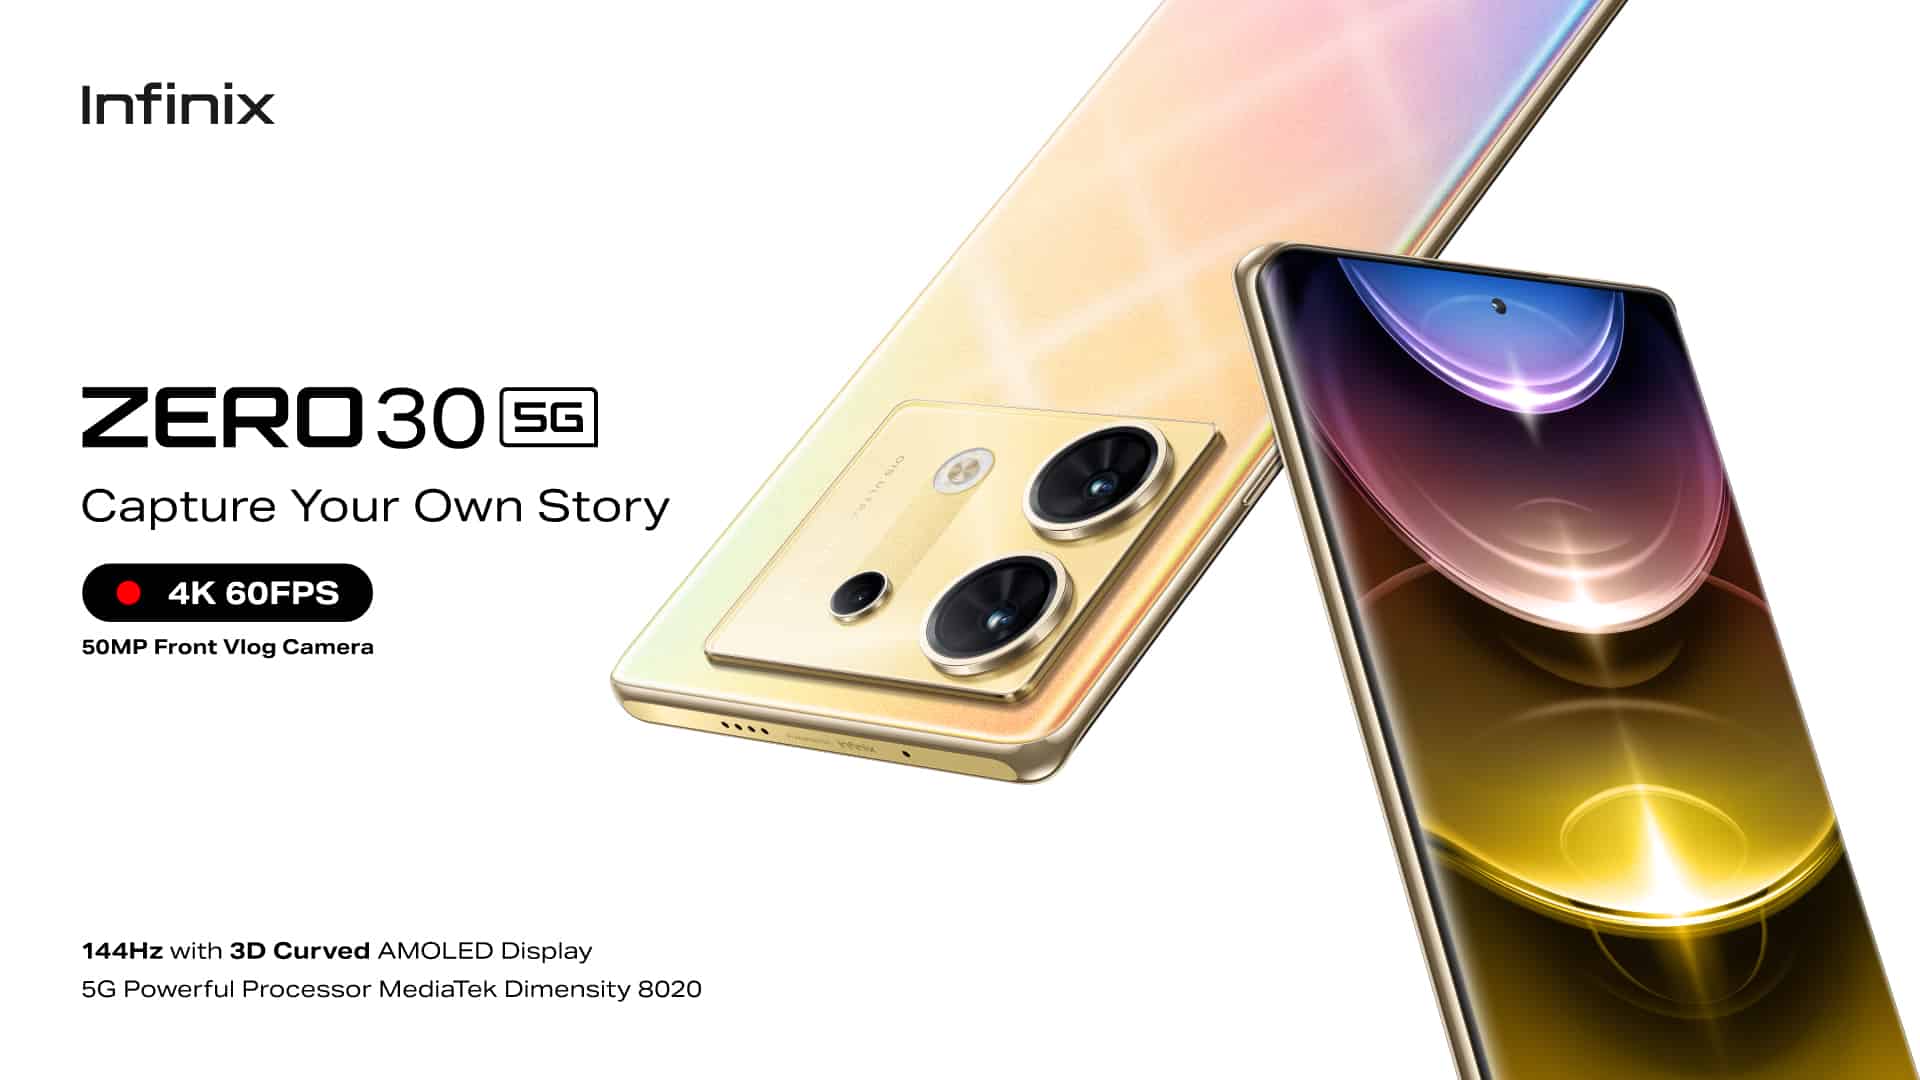 LIGHTS, CAMERA, VLOG! GET READY TO CAPTURE YOUR OWN STORY WITH INFINIX ZERO 30 5G ON 2ND NOVEMBER 2023